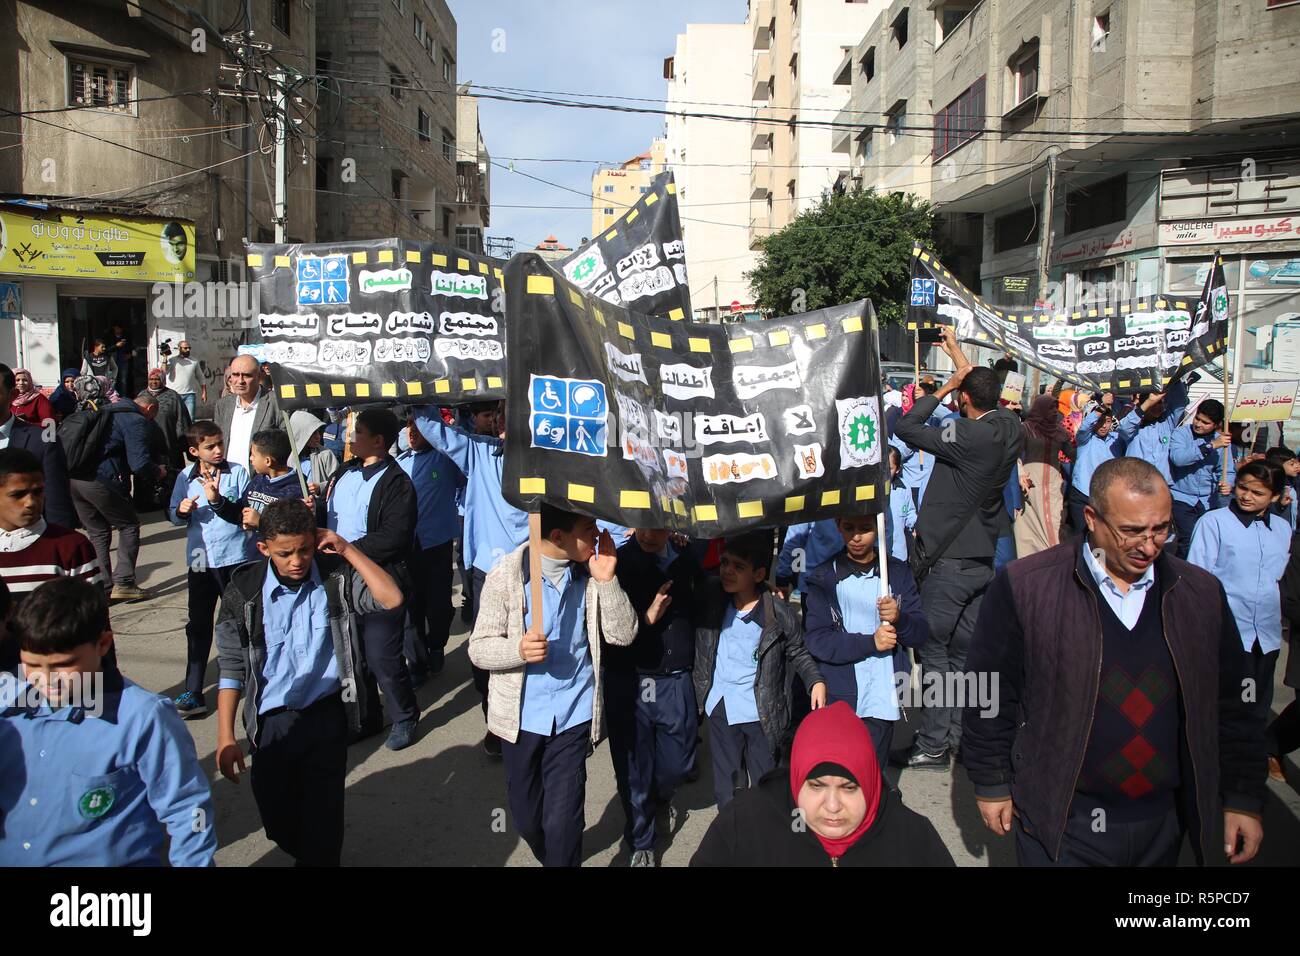 Gaza City, The Gaza Strip, Palestine. 2nd Dec, 2018. Disabled Palestinians take part taking part in rally in front of the UN quarter in Gaza city demanding the protection of disabled rights. Credit: Hassan Jedi/Quds Net News/ZUMA Wire/Alamy Live News Stock Photo